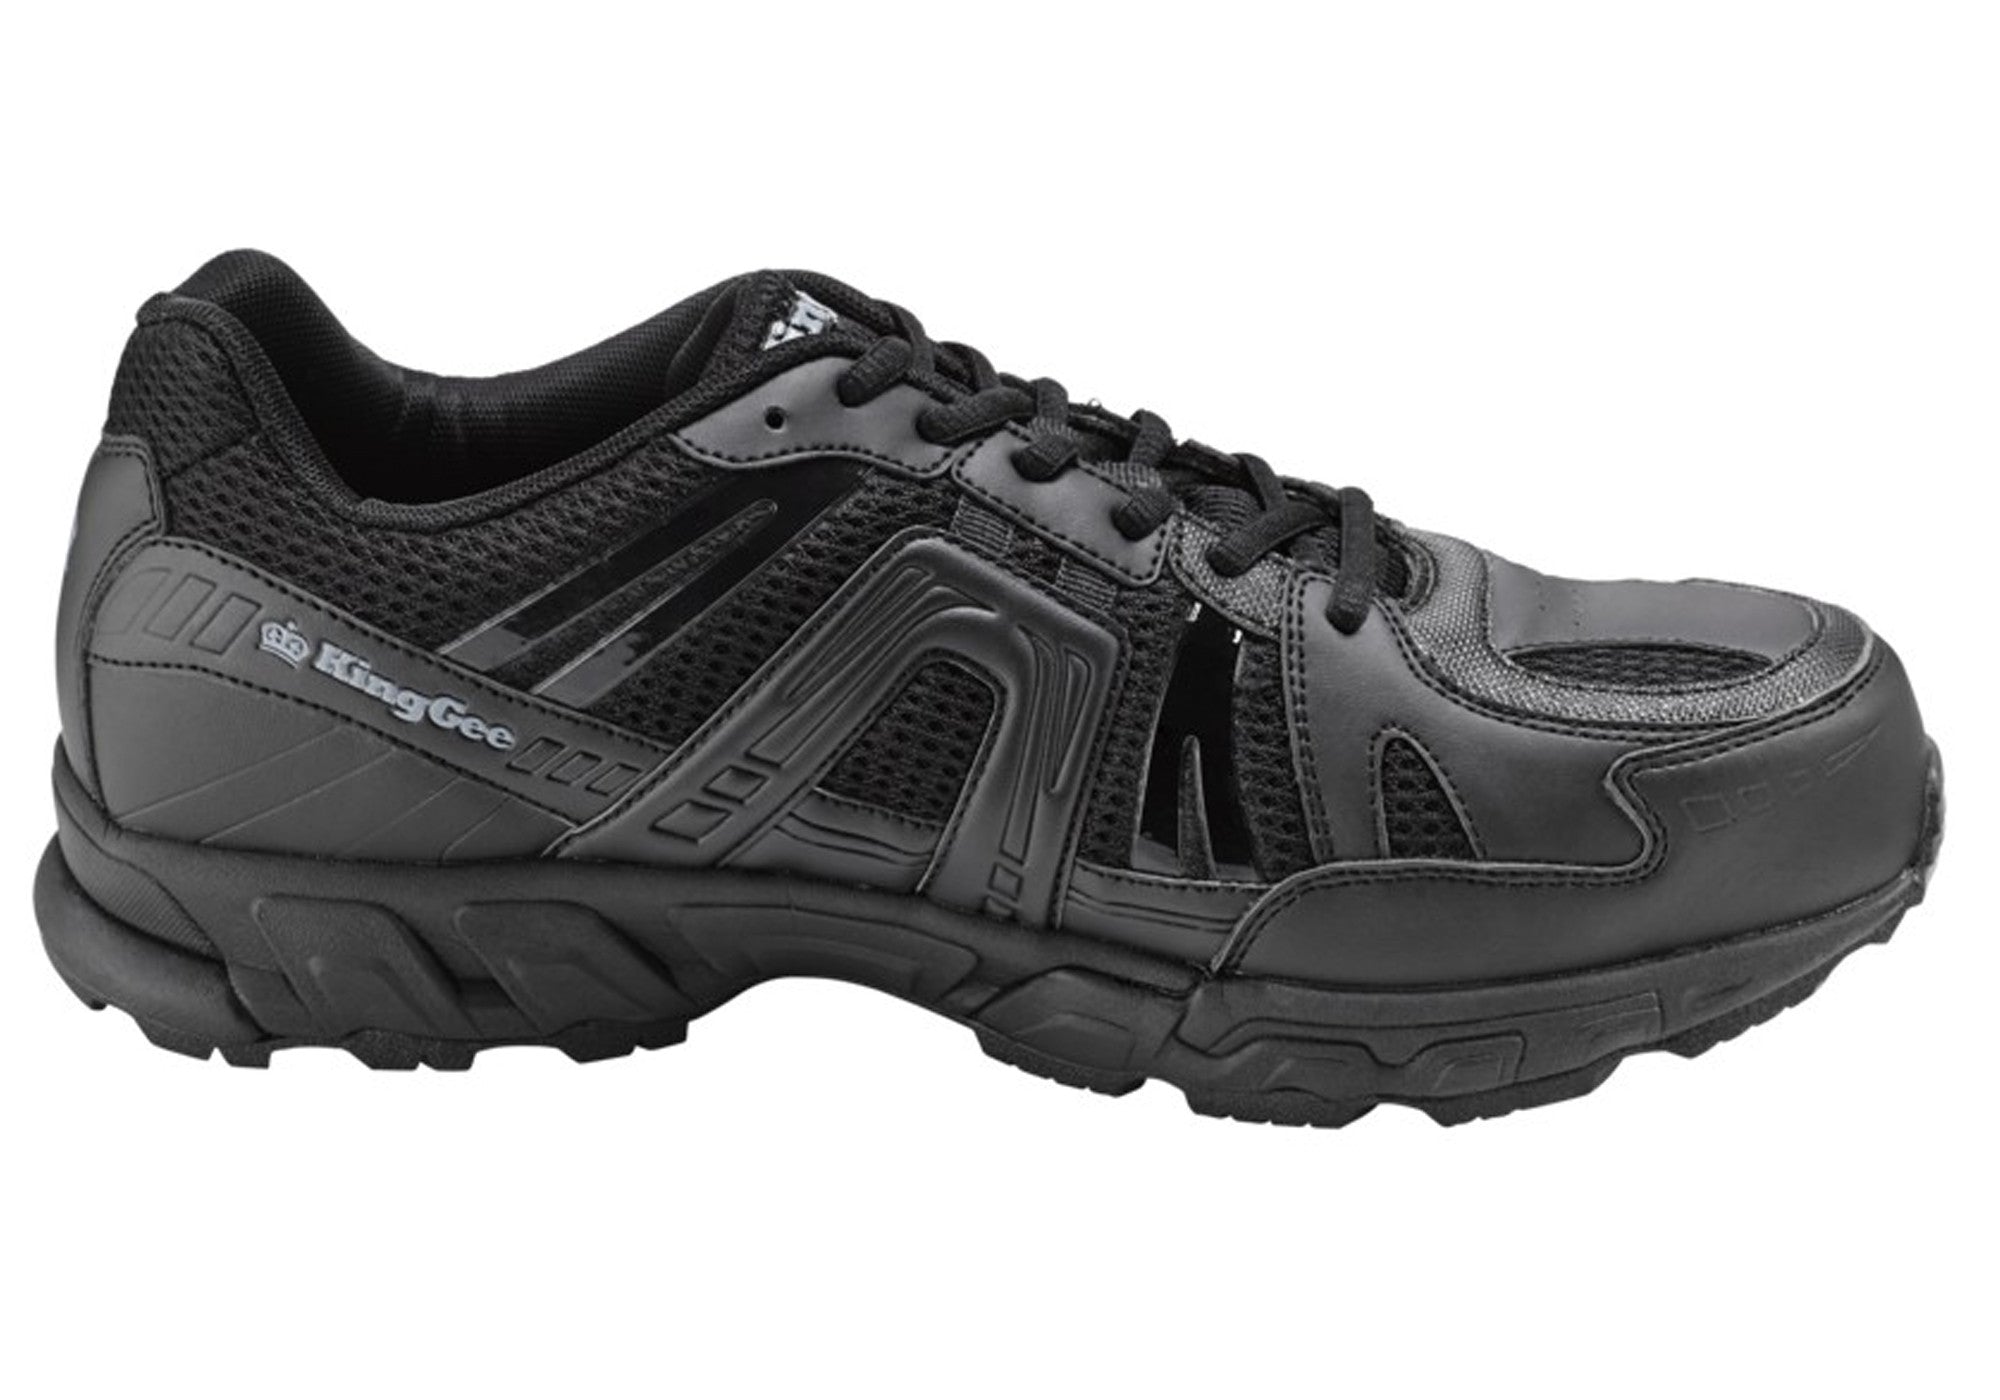 King Gee Comp Tec Safety Mens Composite Toe Shoes | Brand House Direct